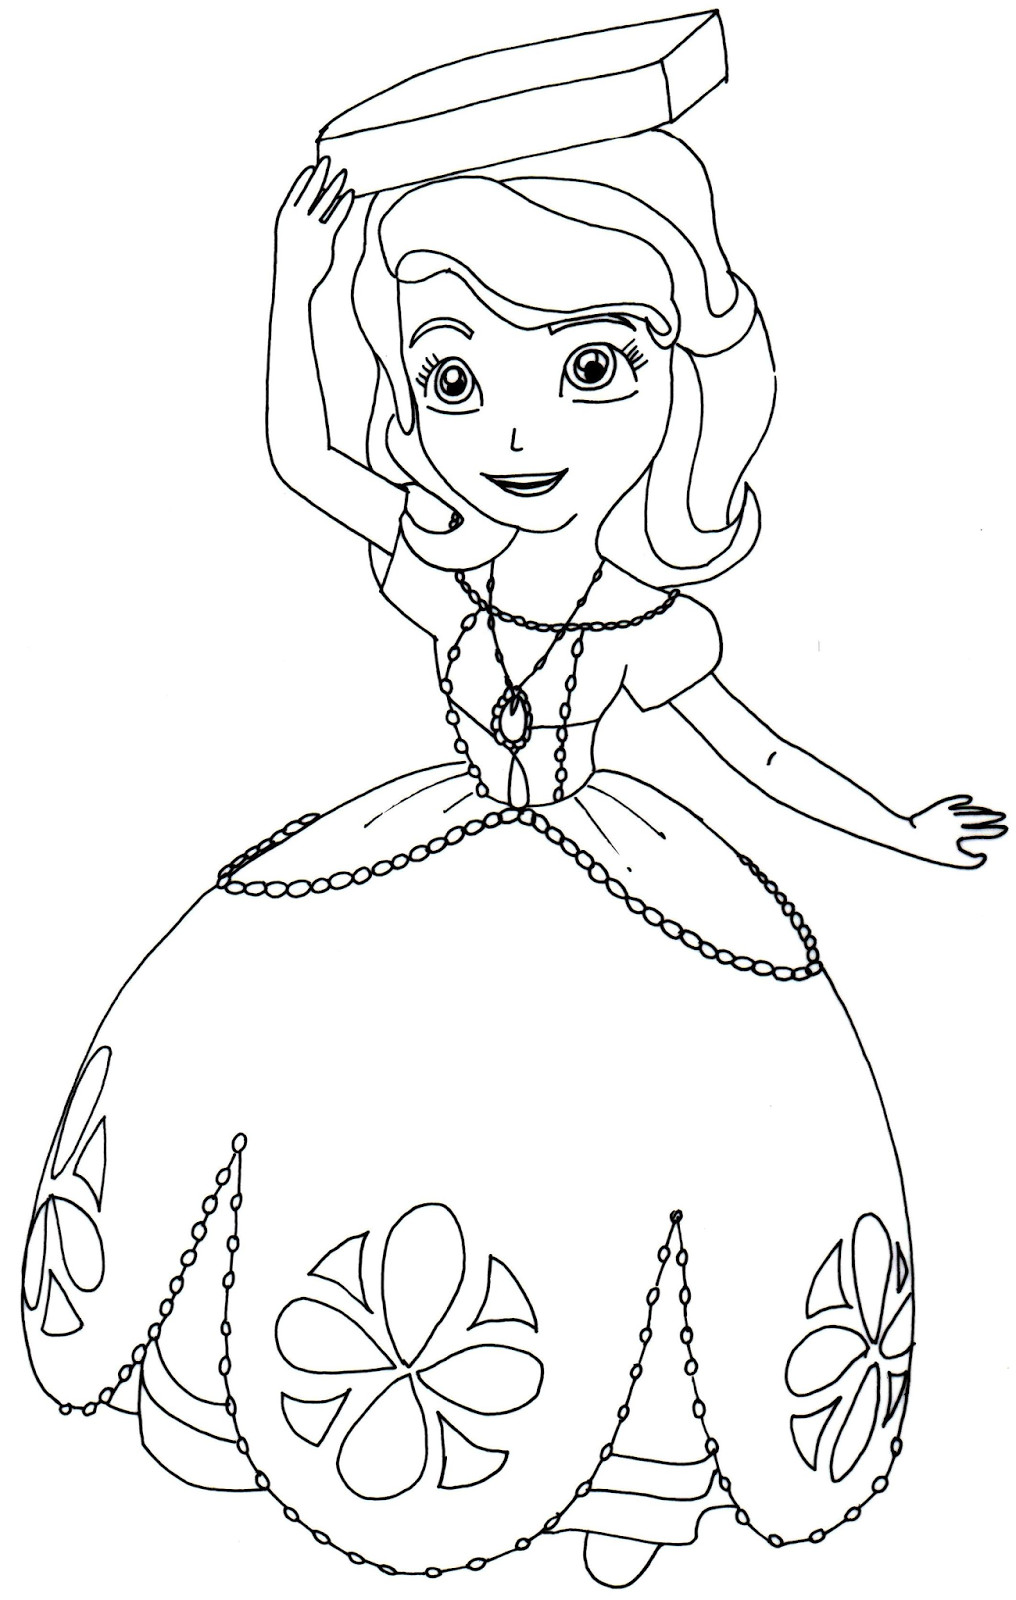 Sofia The First Printable Coloring Pages
 Sofia The First Coloring Pages April 2014